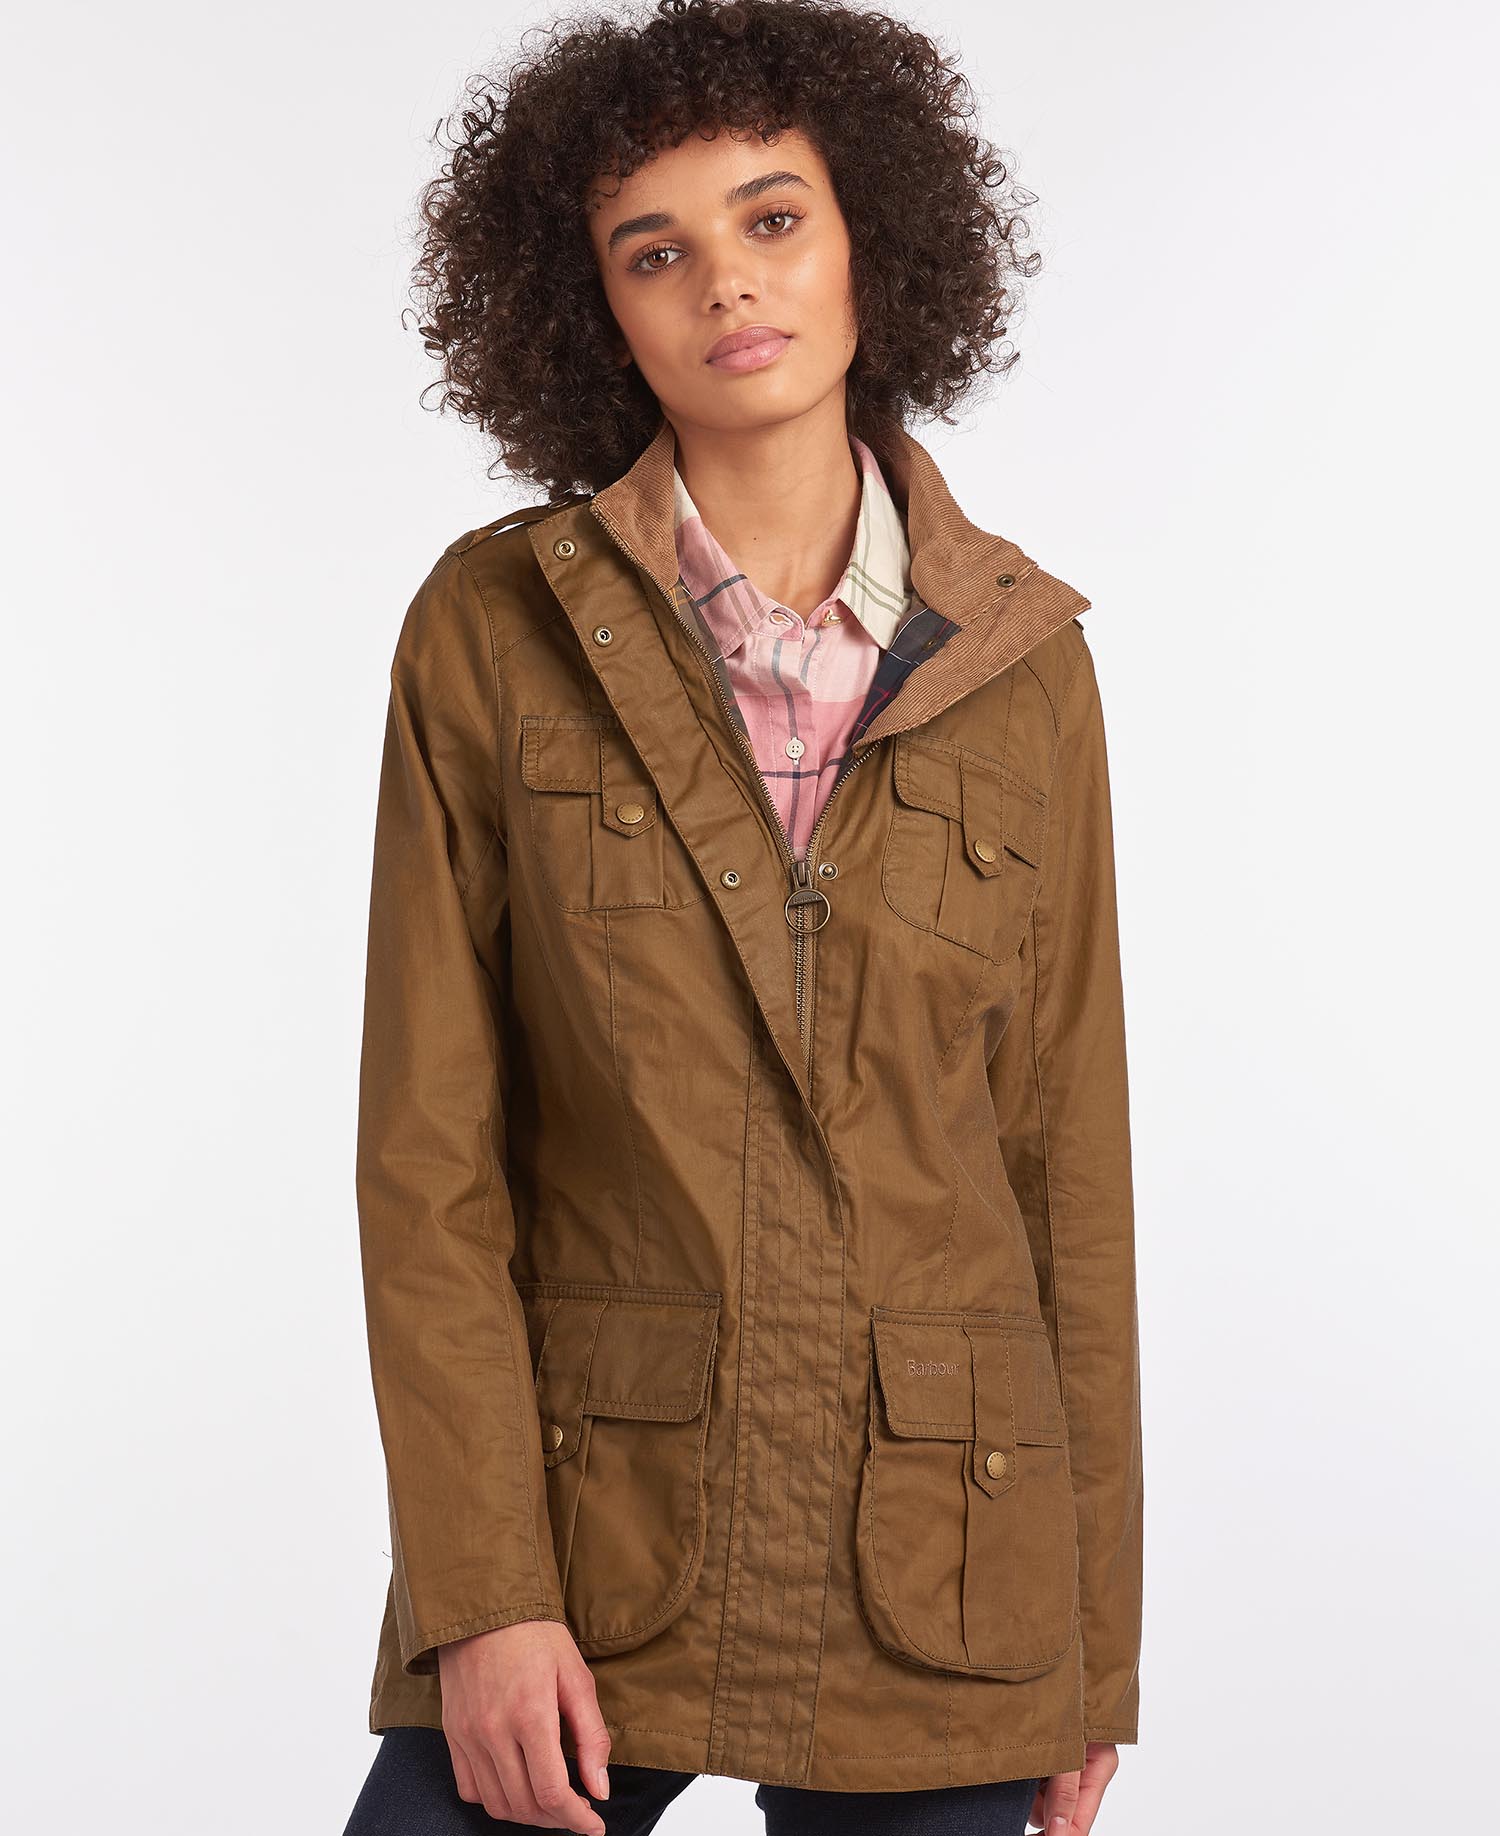 Barbour Lightweight Defence Waxed Cotton Jacket in Beige | Barbour